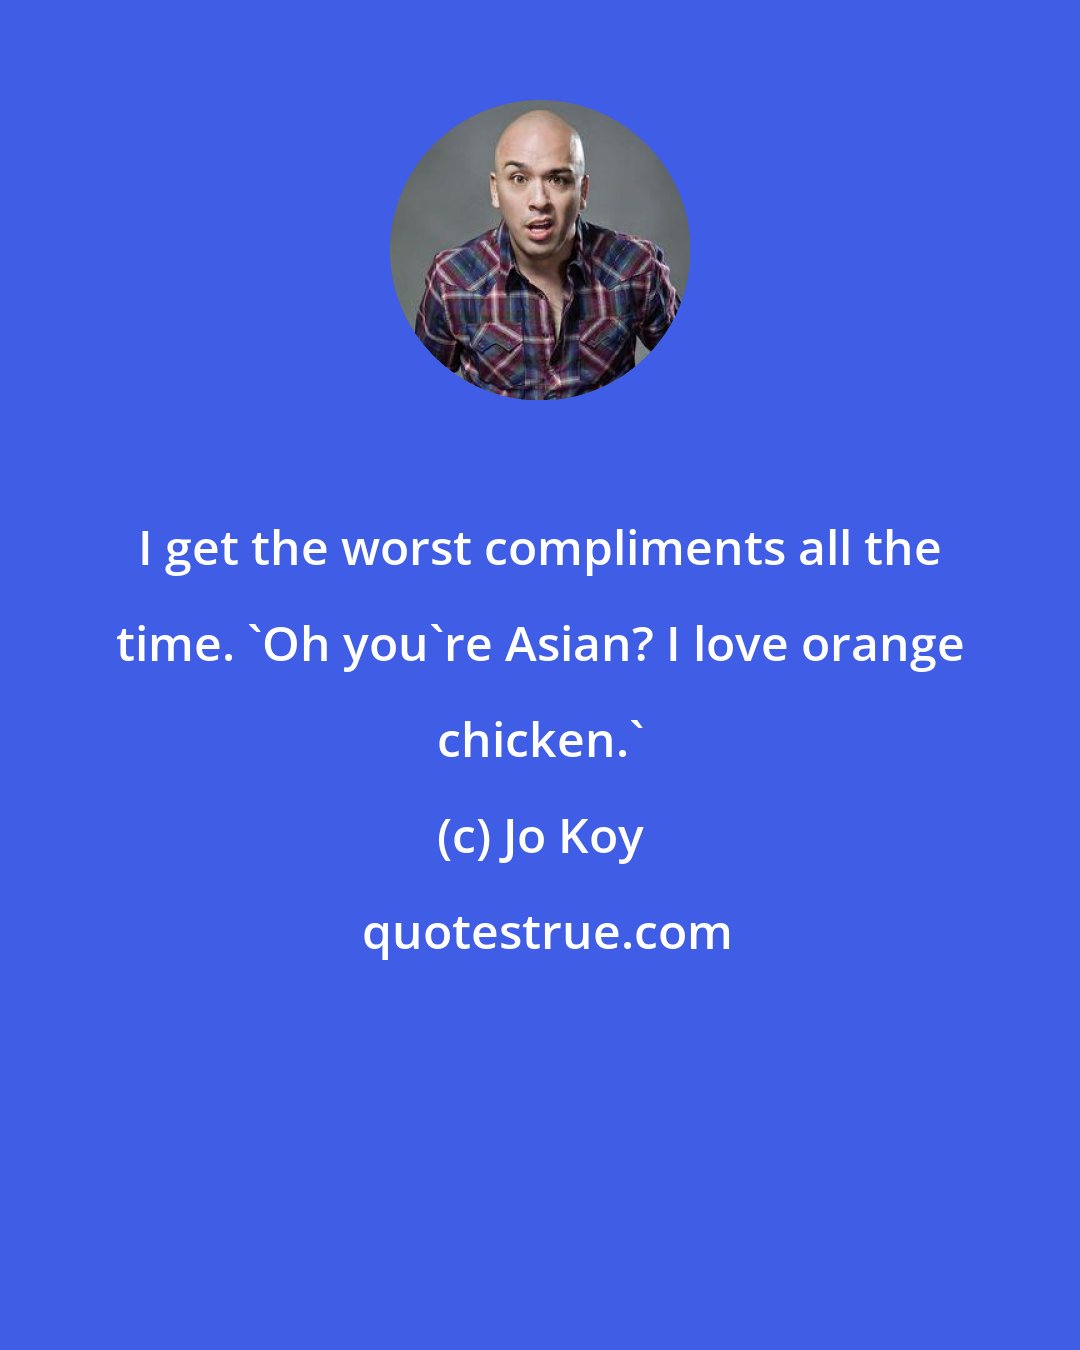 Jo Koy: I get the worst compliments all the time. 'Oh you're Asian? I love orange chicken.'